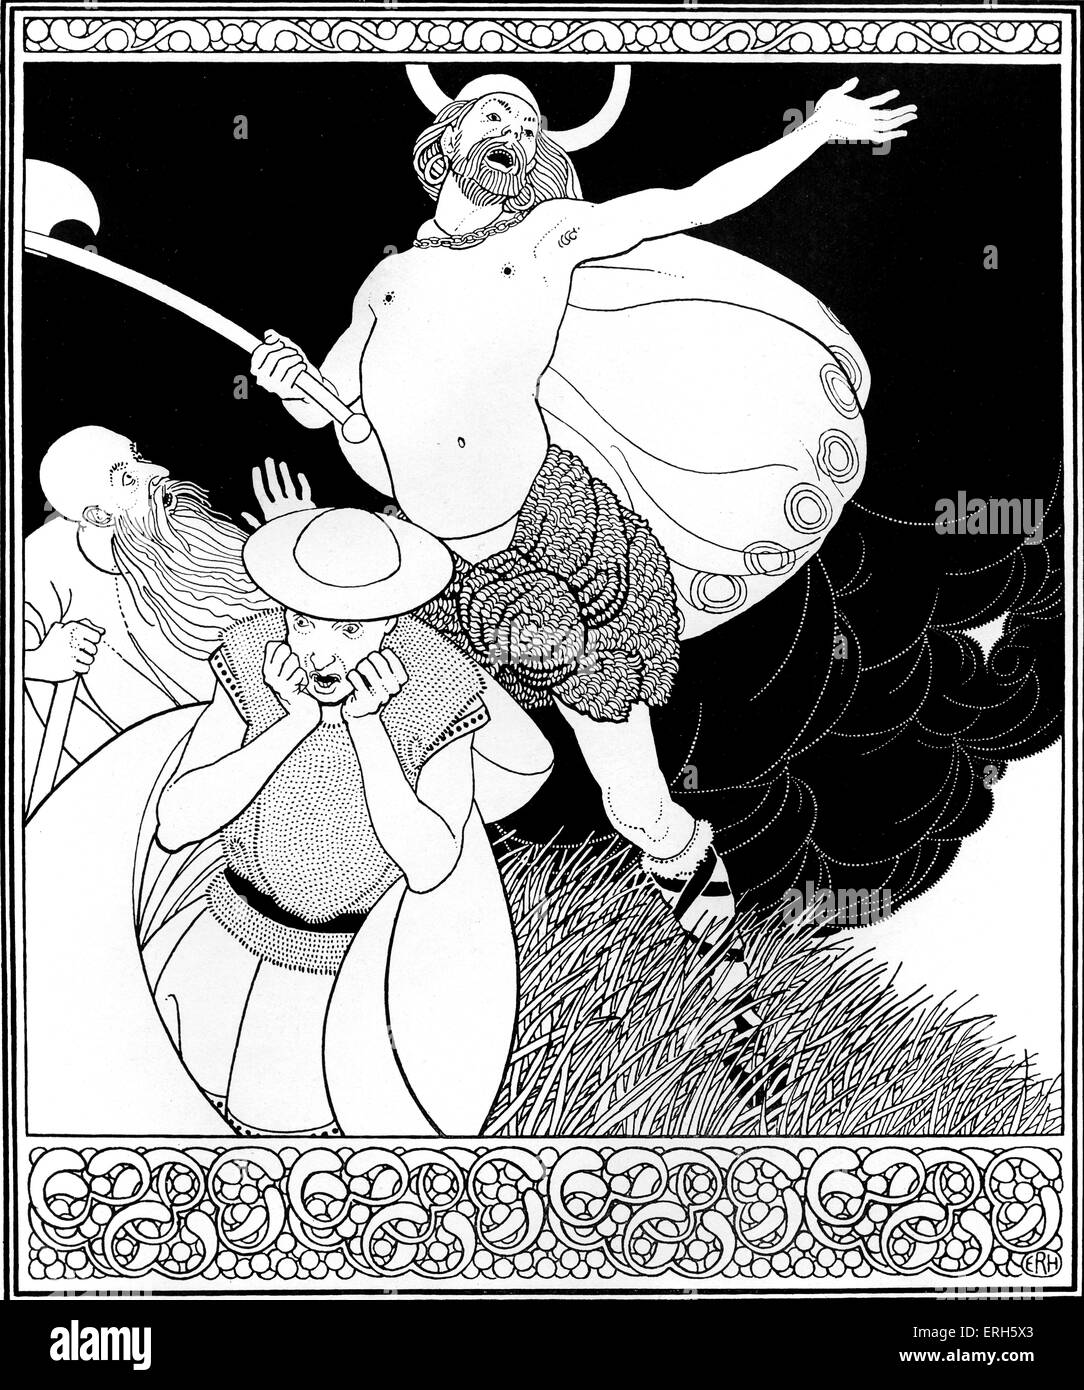 Faith, Half-Faith, and No Faith At All by Robert Louis Stevenson, illustration by E. R. Herman (dates unknown). From  'Fables' Stock Photo